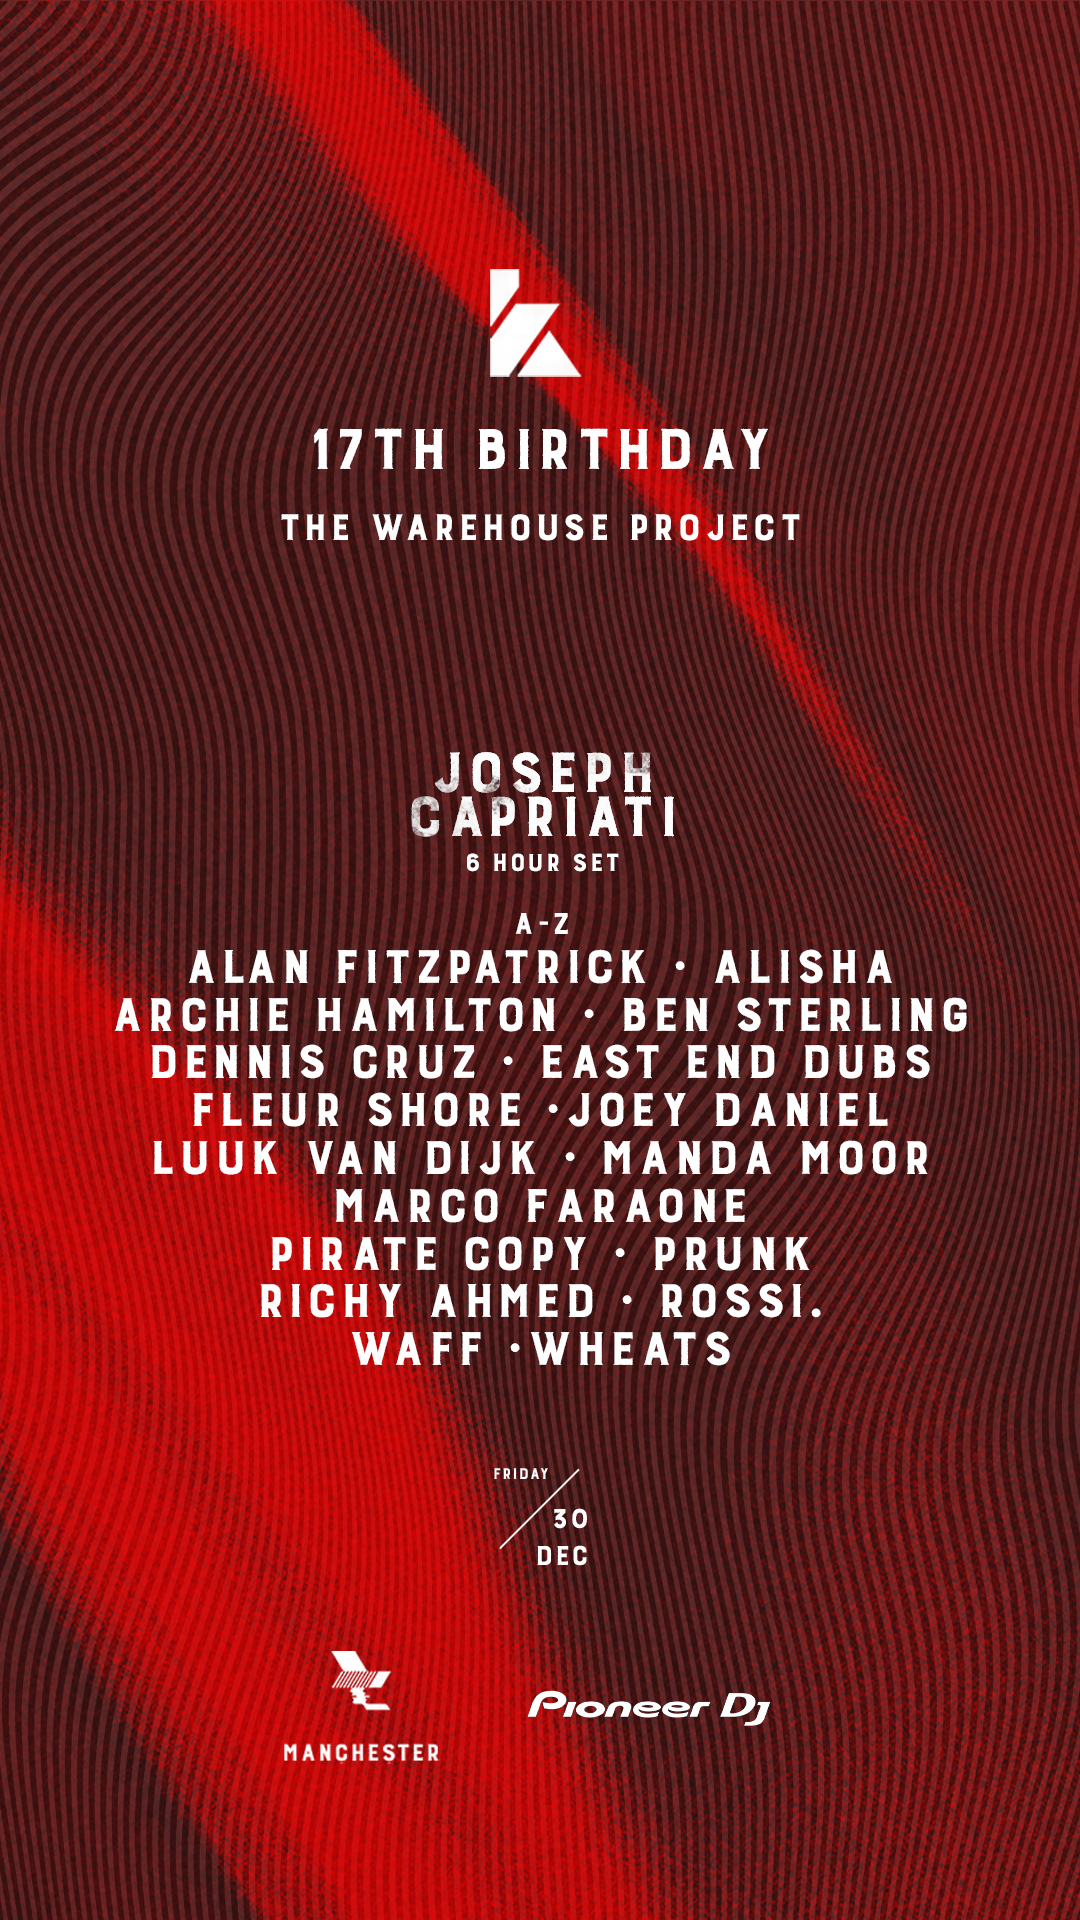 Kaluki To Celebrate 17th Birthday In Collaboration With The Warehouse Project